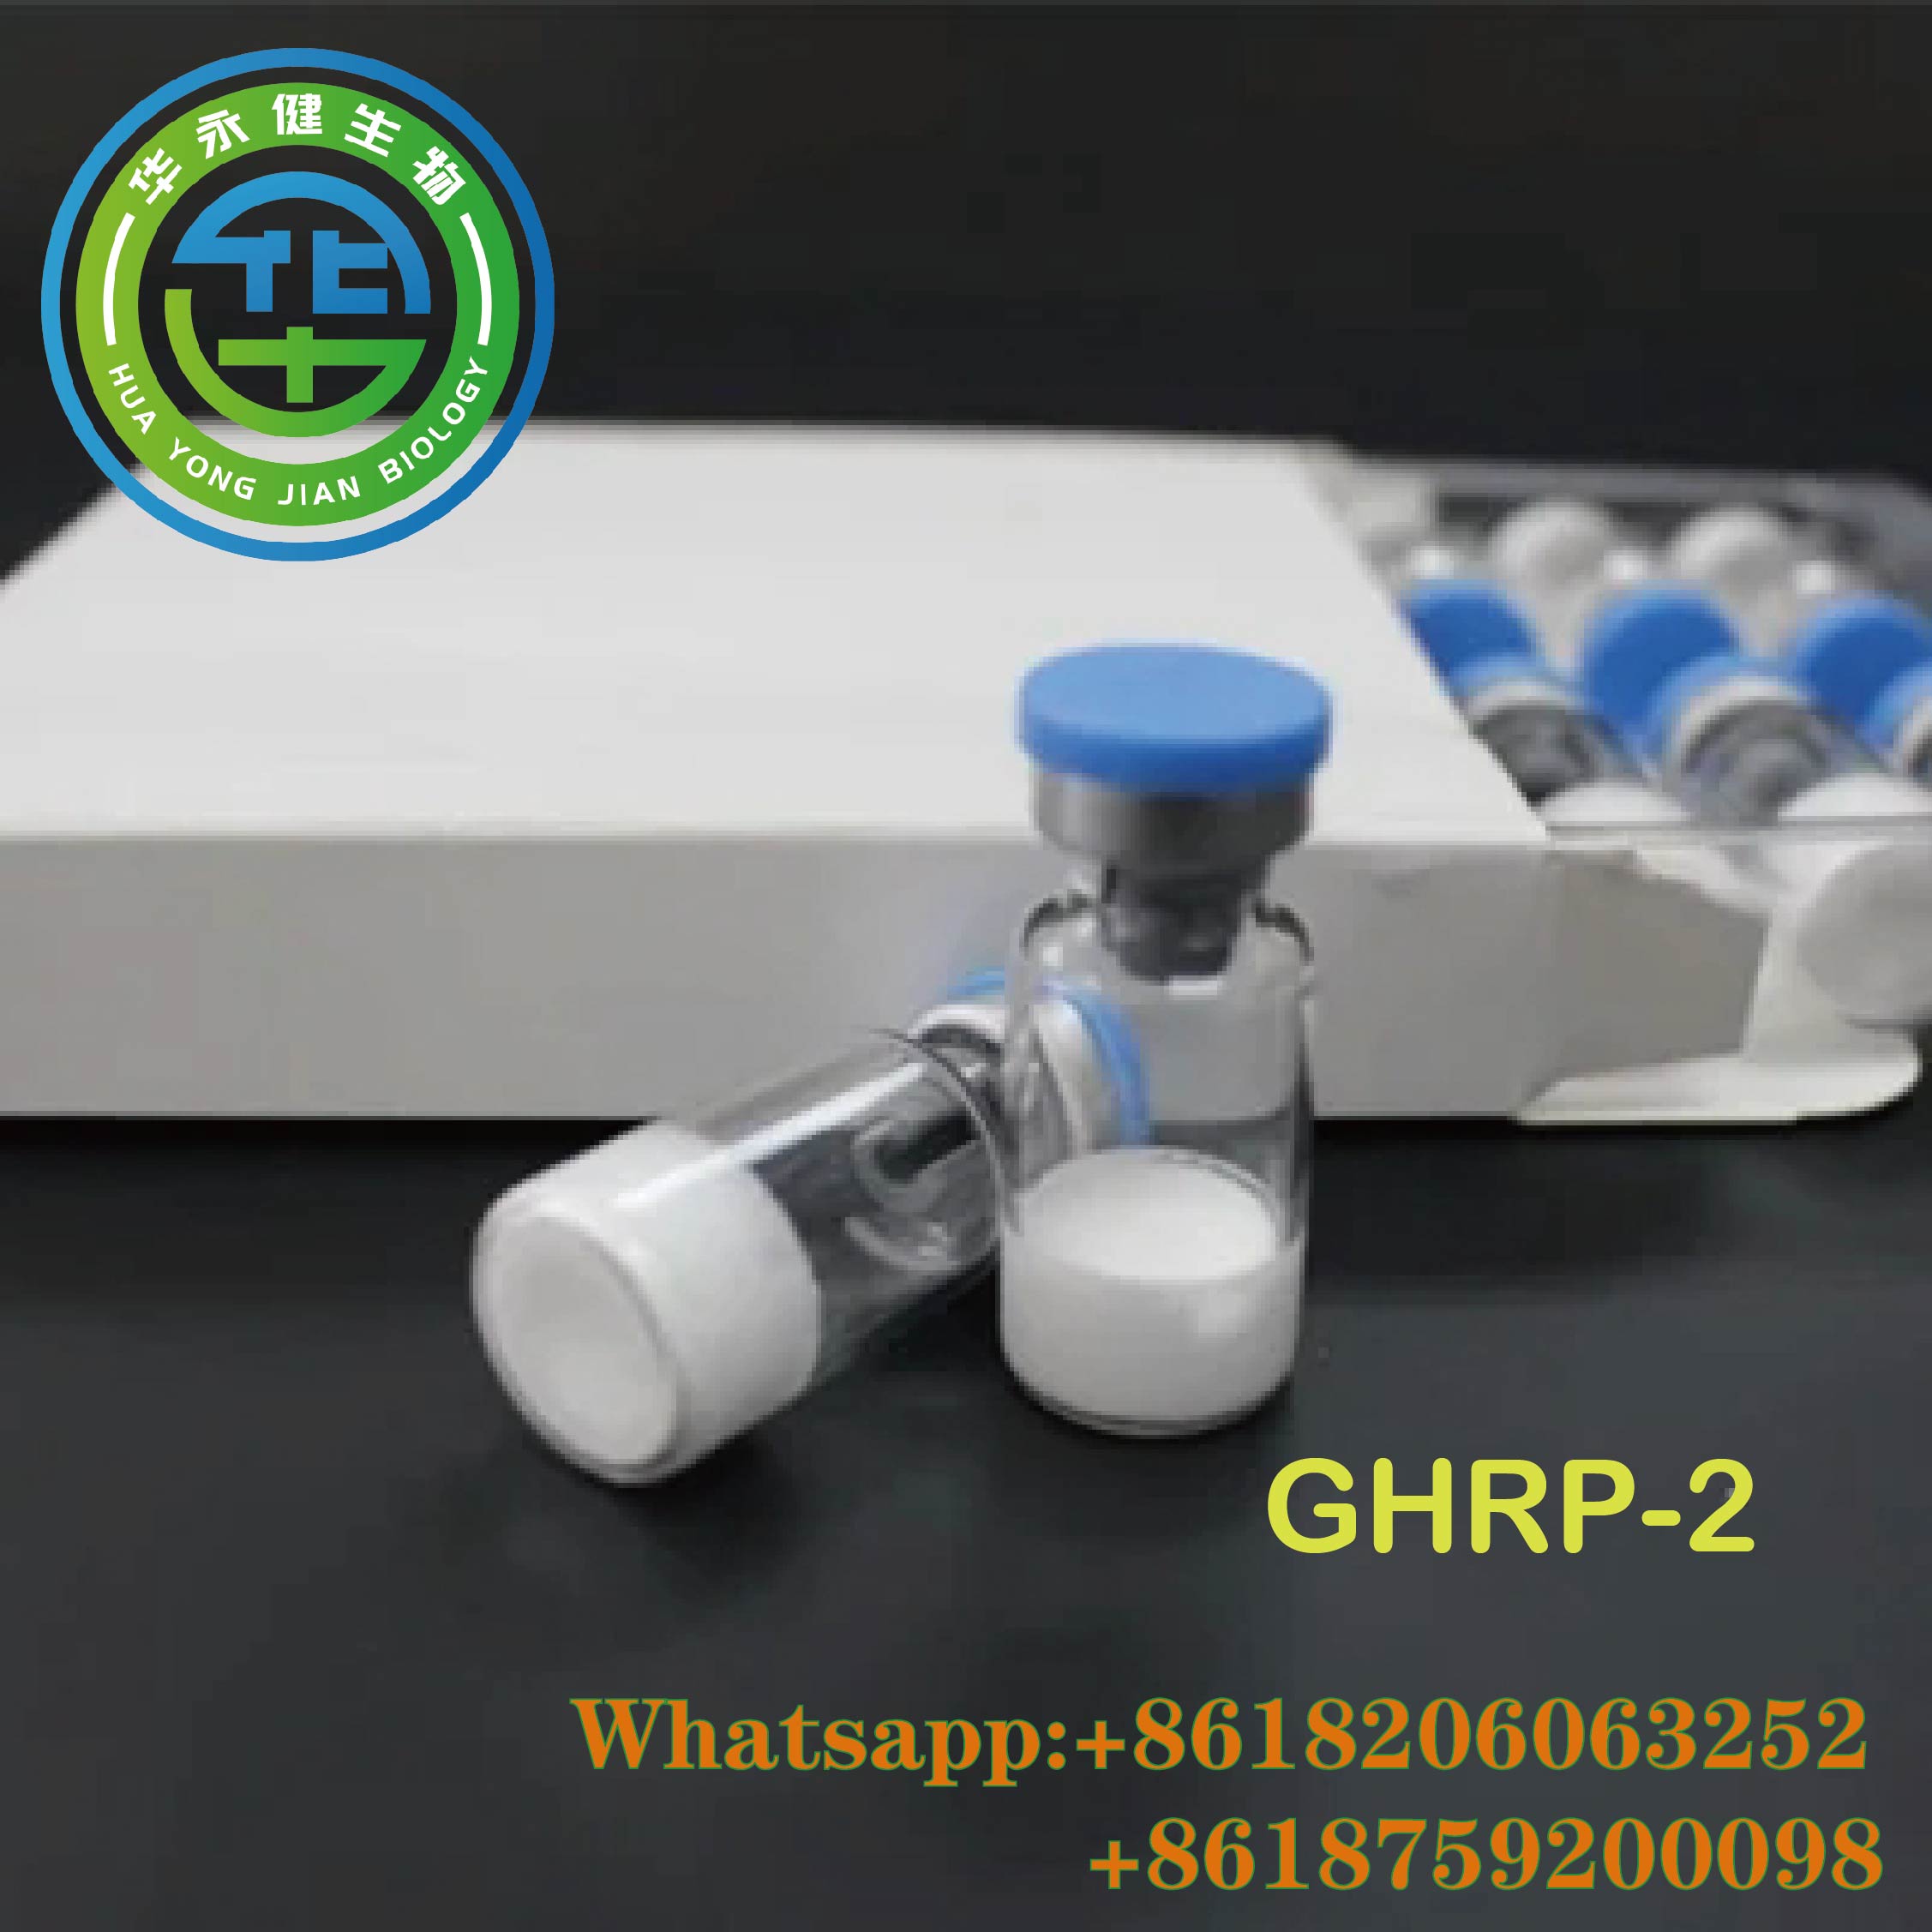 GHRP-2 Peptide White Lyophilized to Burn Fat and Growth Muscle